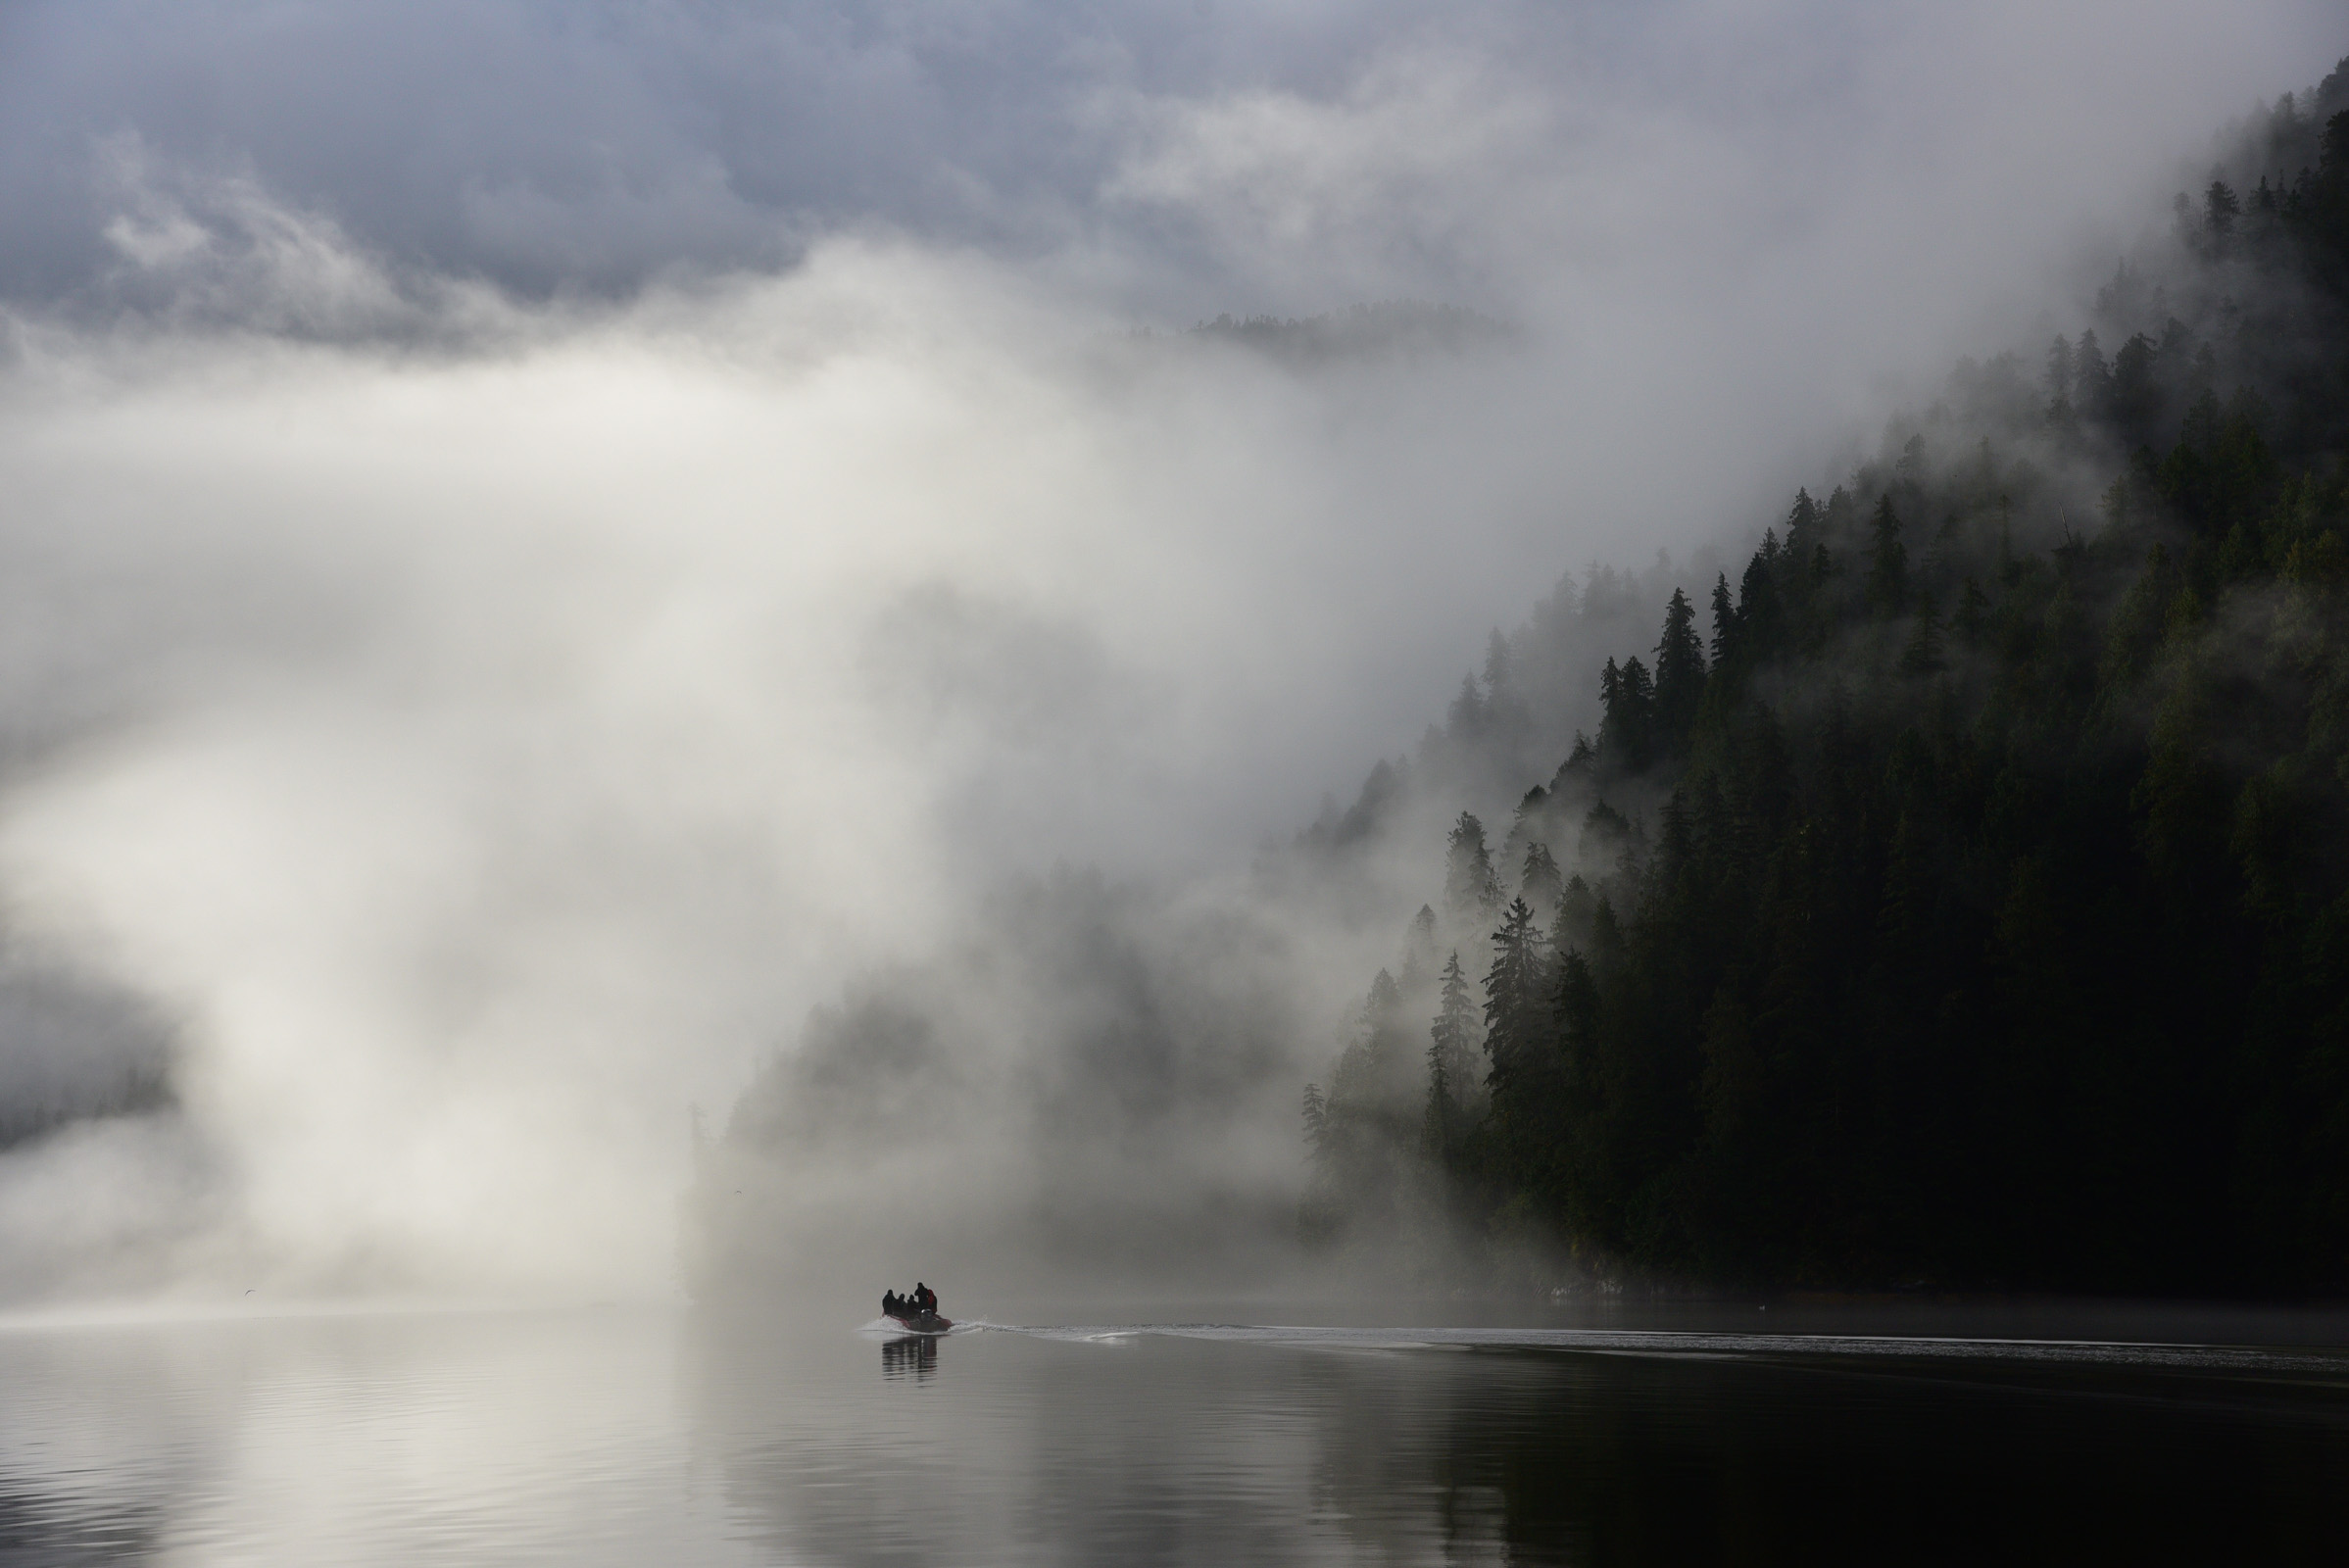 Exploring a sheltered lagoon in the Great Bear Rainforest